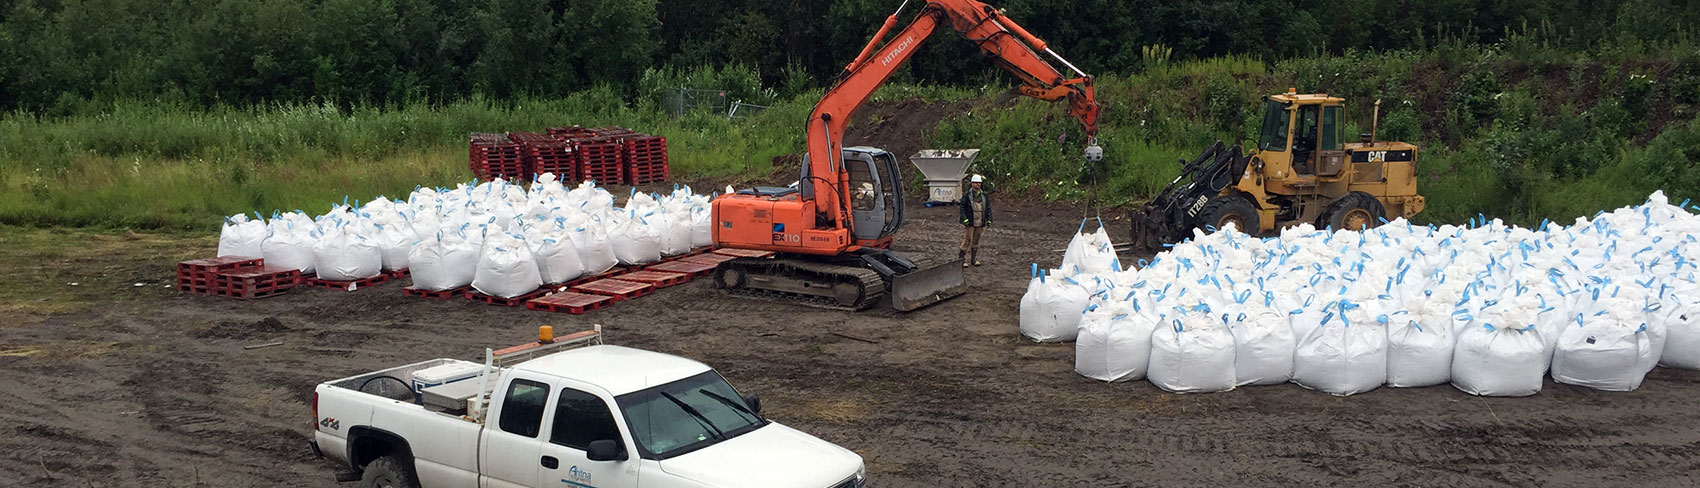 Excavator loads up bags of waste.